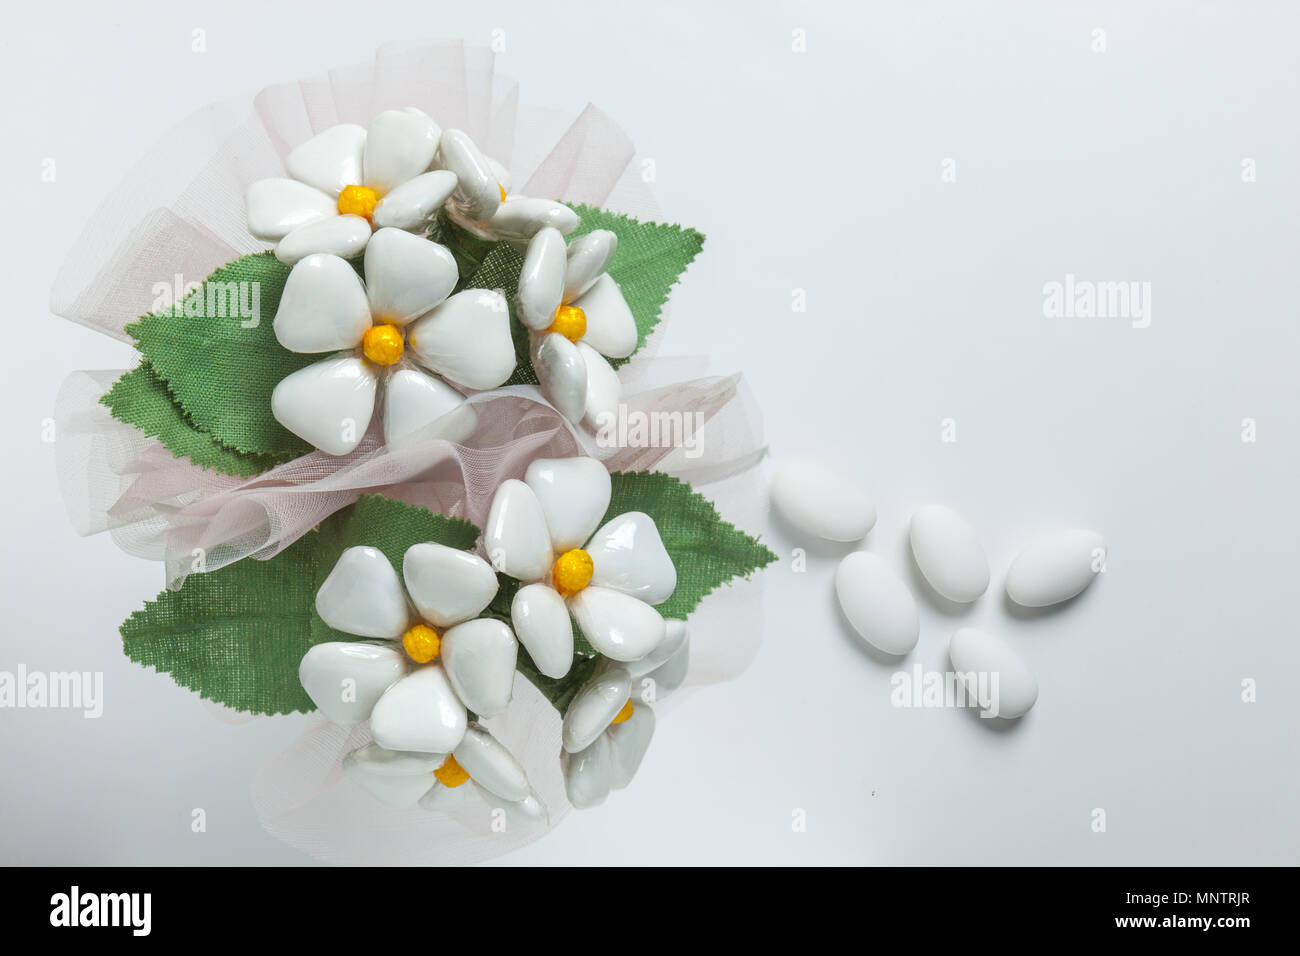 confetti packaged in the shape of flowers Stock Photo